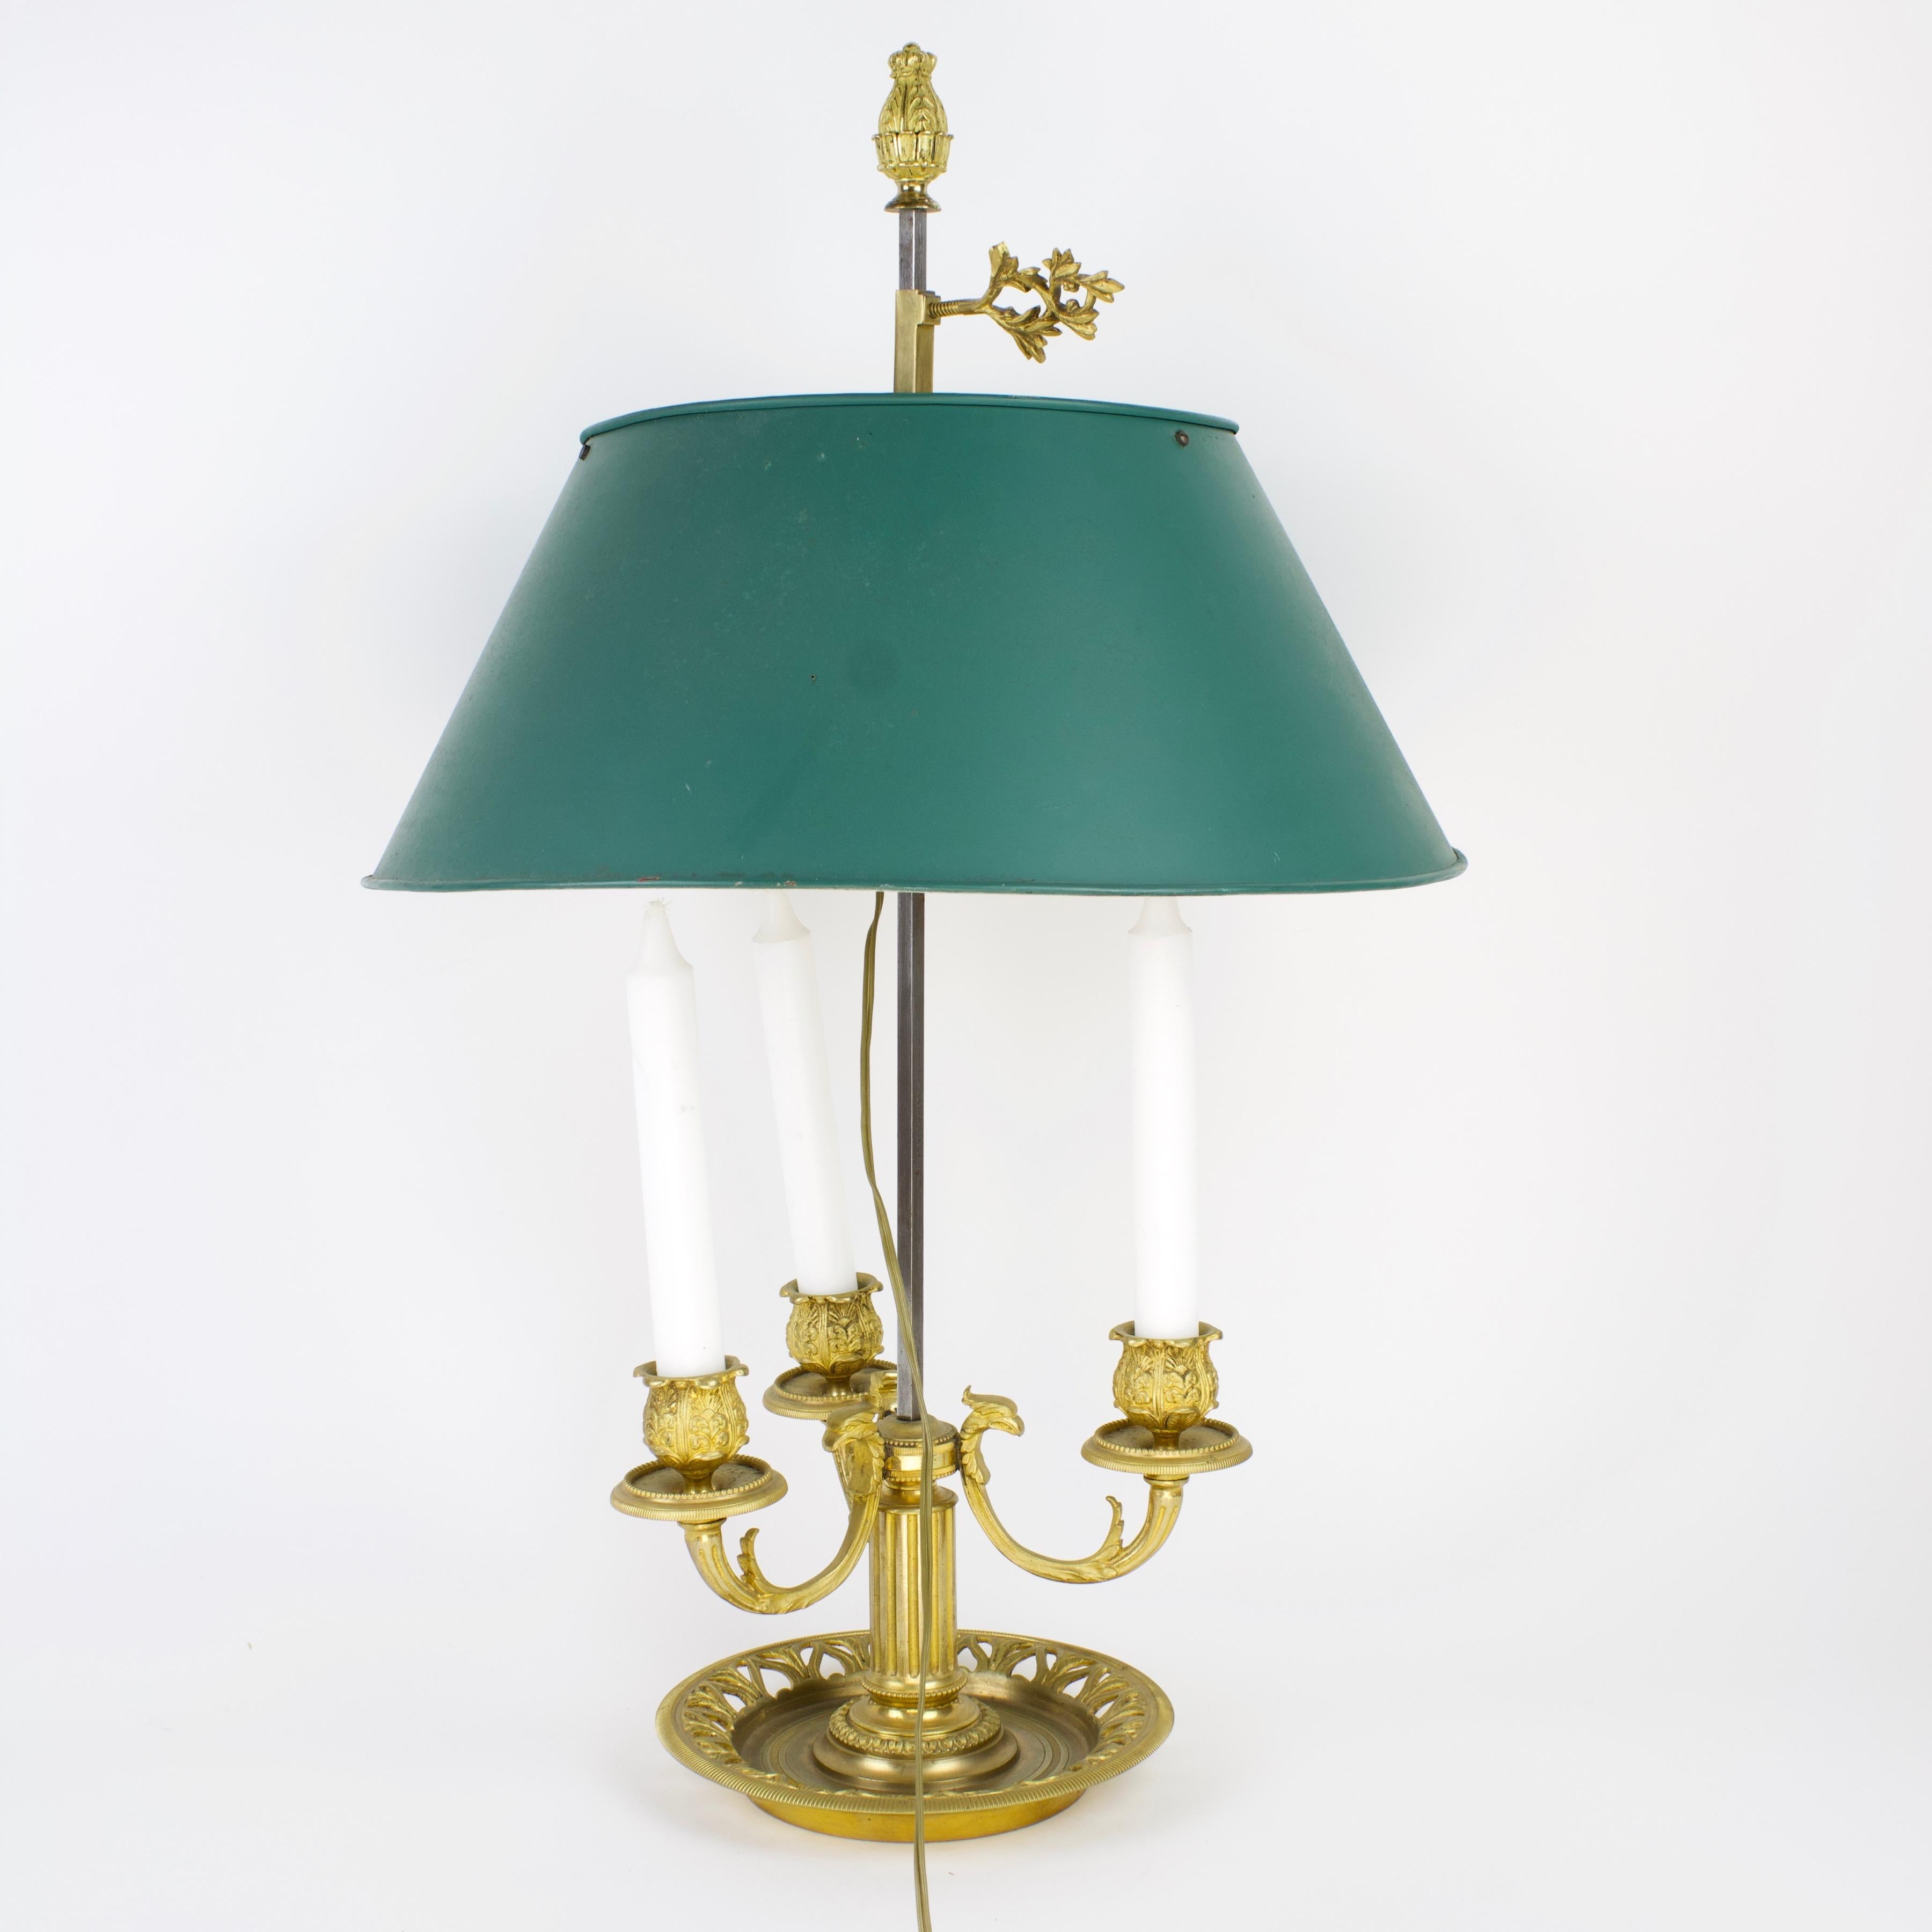 French 19th Century Louis XVI Gilt Bronze Bouillotte lamp

A 19th century Louis XVI style bouillotte lamp in green toleware and gilt bronze, with a circular stem supporting three scrolled foliate and eagle head candle branches, raised on a finely